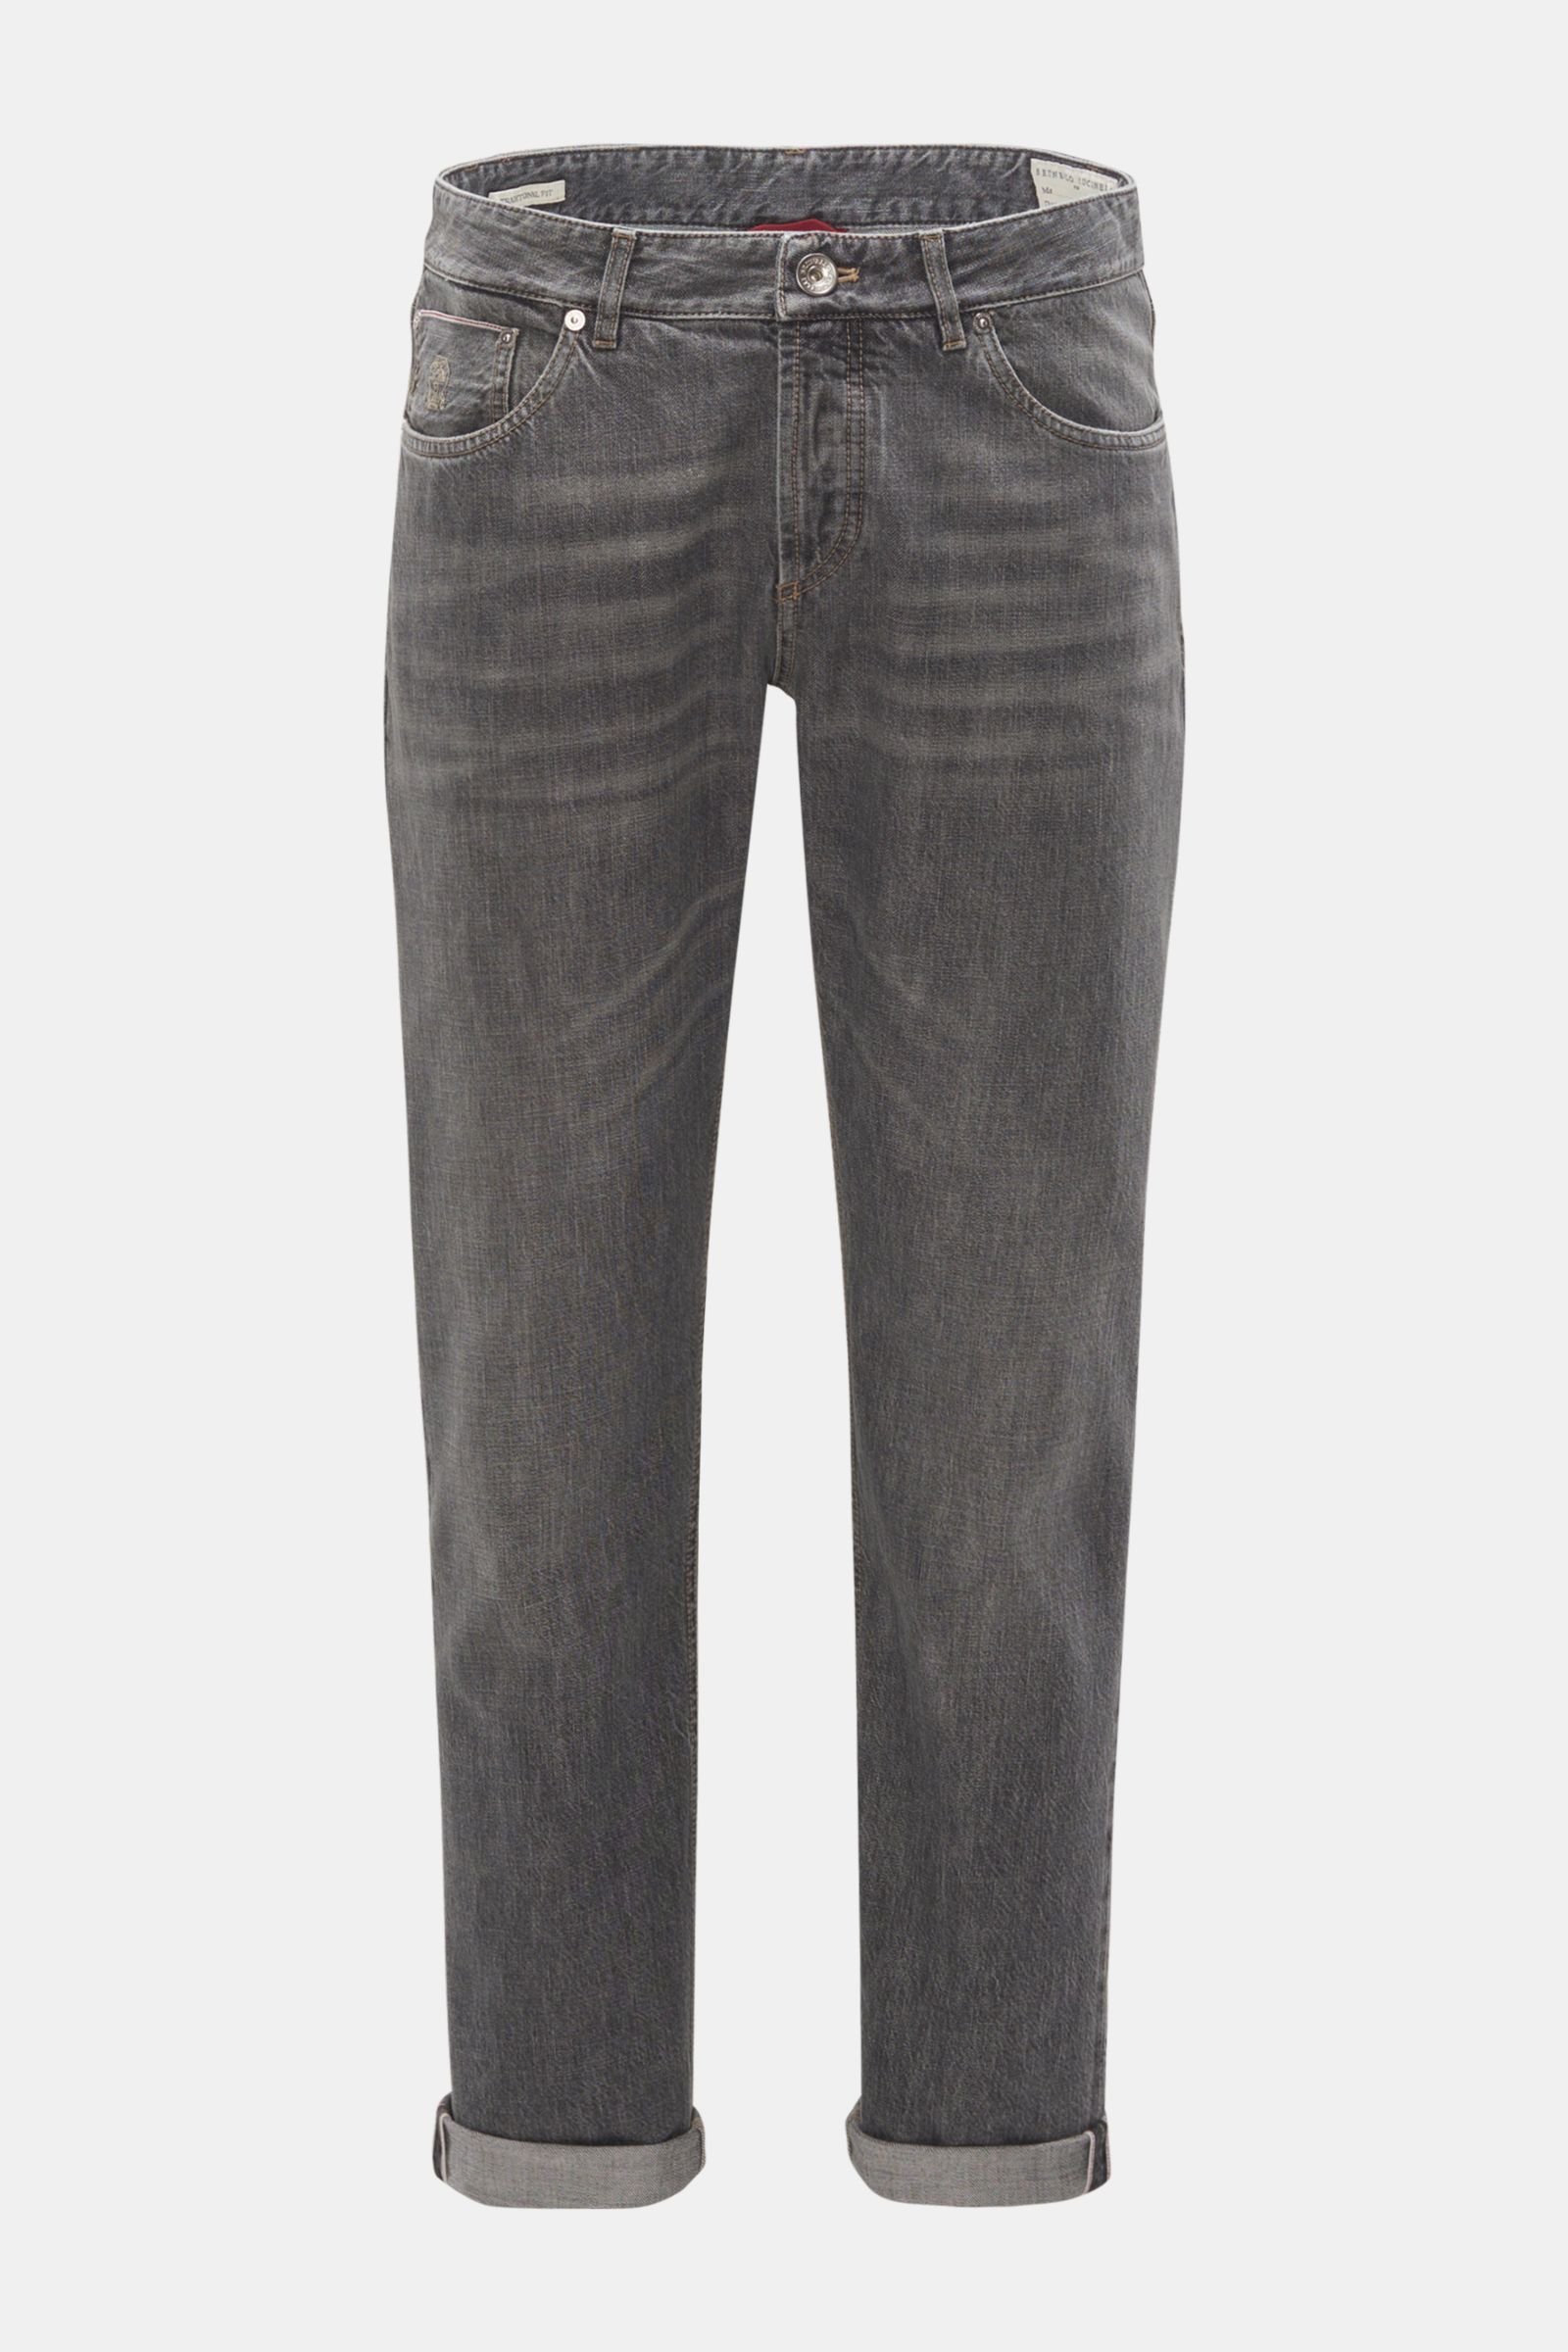 Jeans 'Traditional Fit' grau